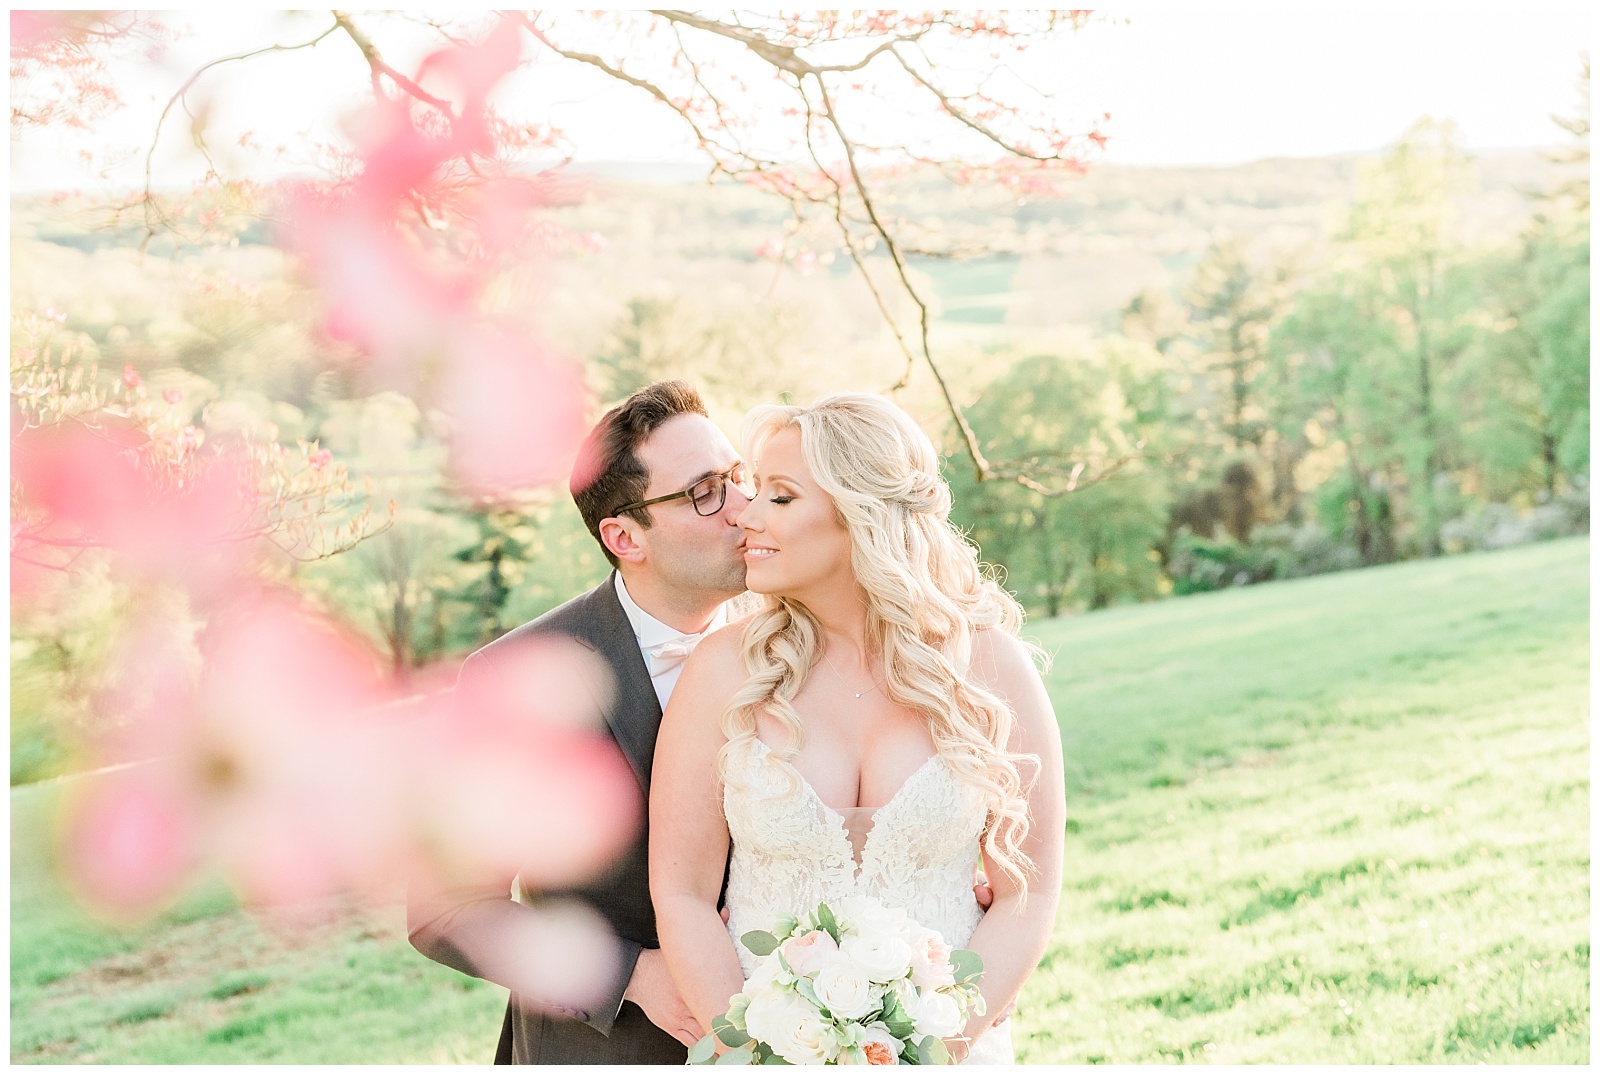 A groom kisses his bride on the cheek at golden hour underneath a pink dogwood tree.